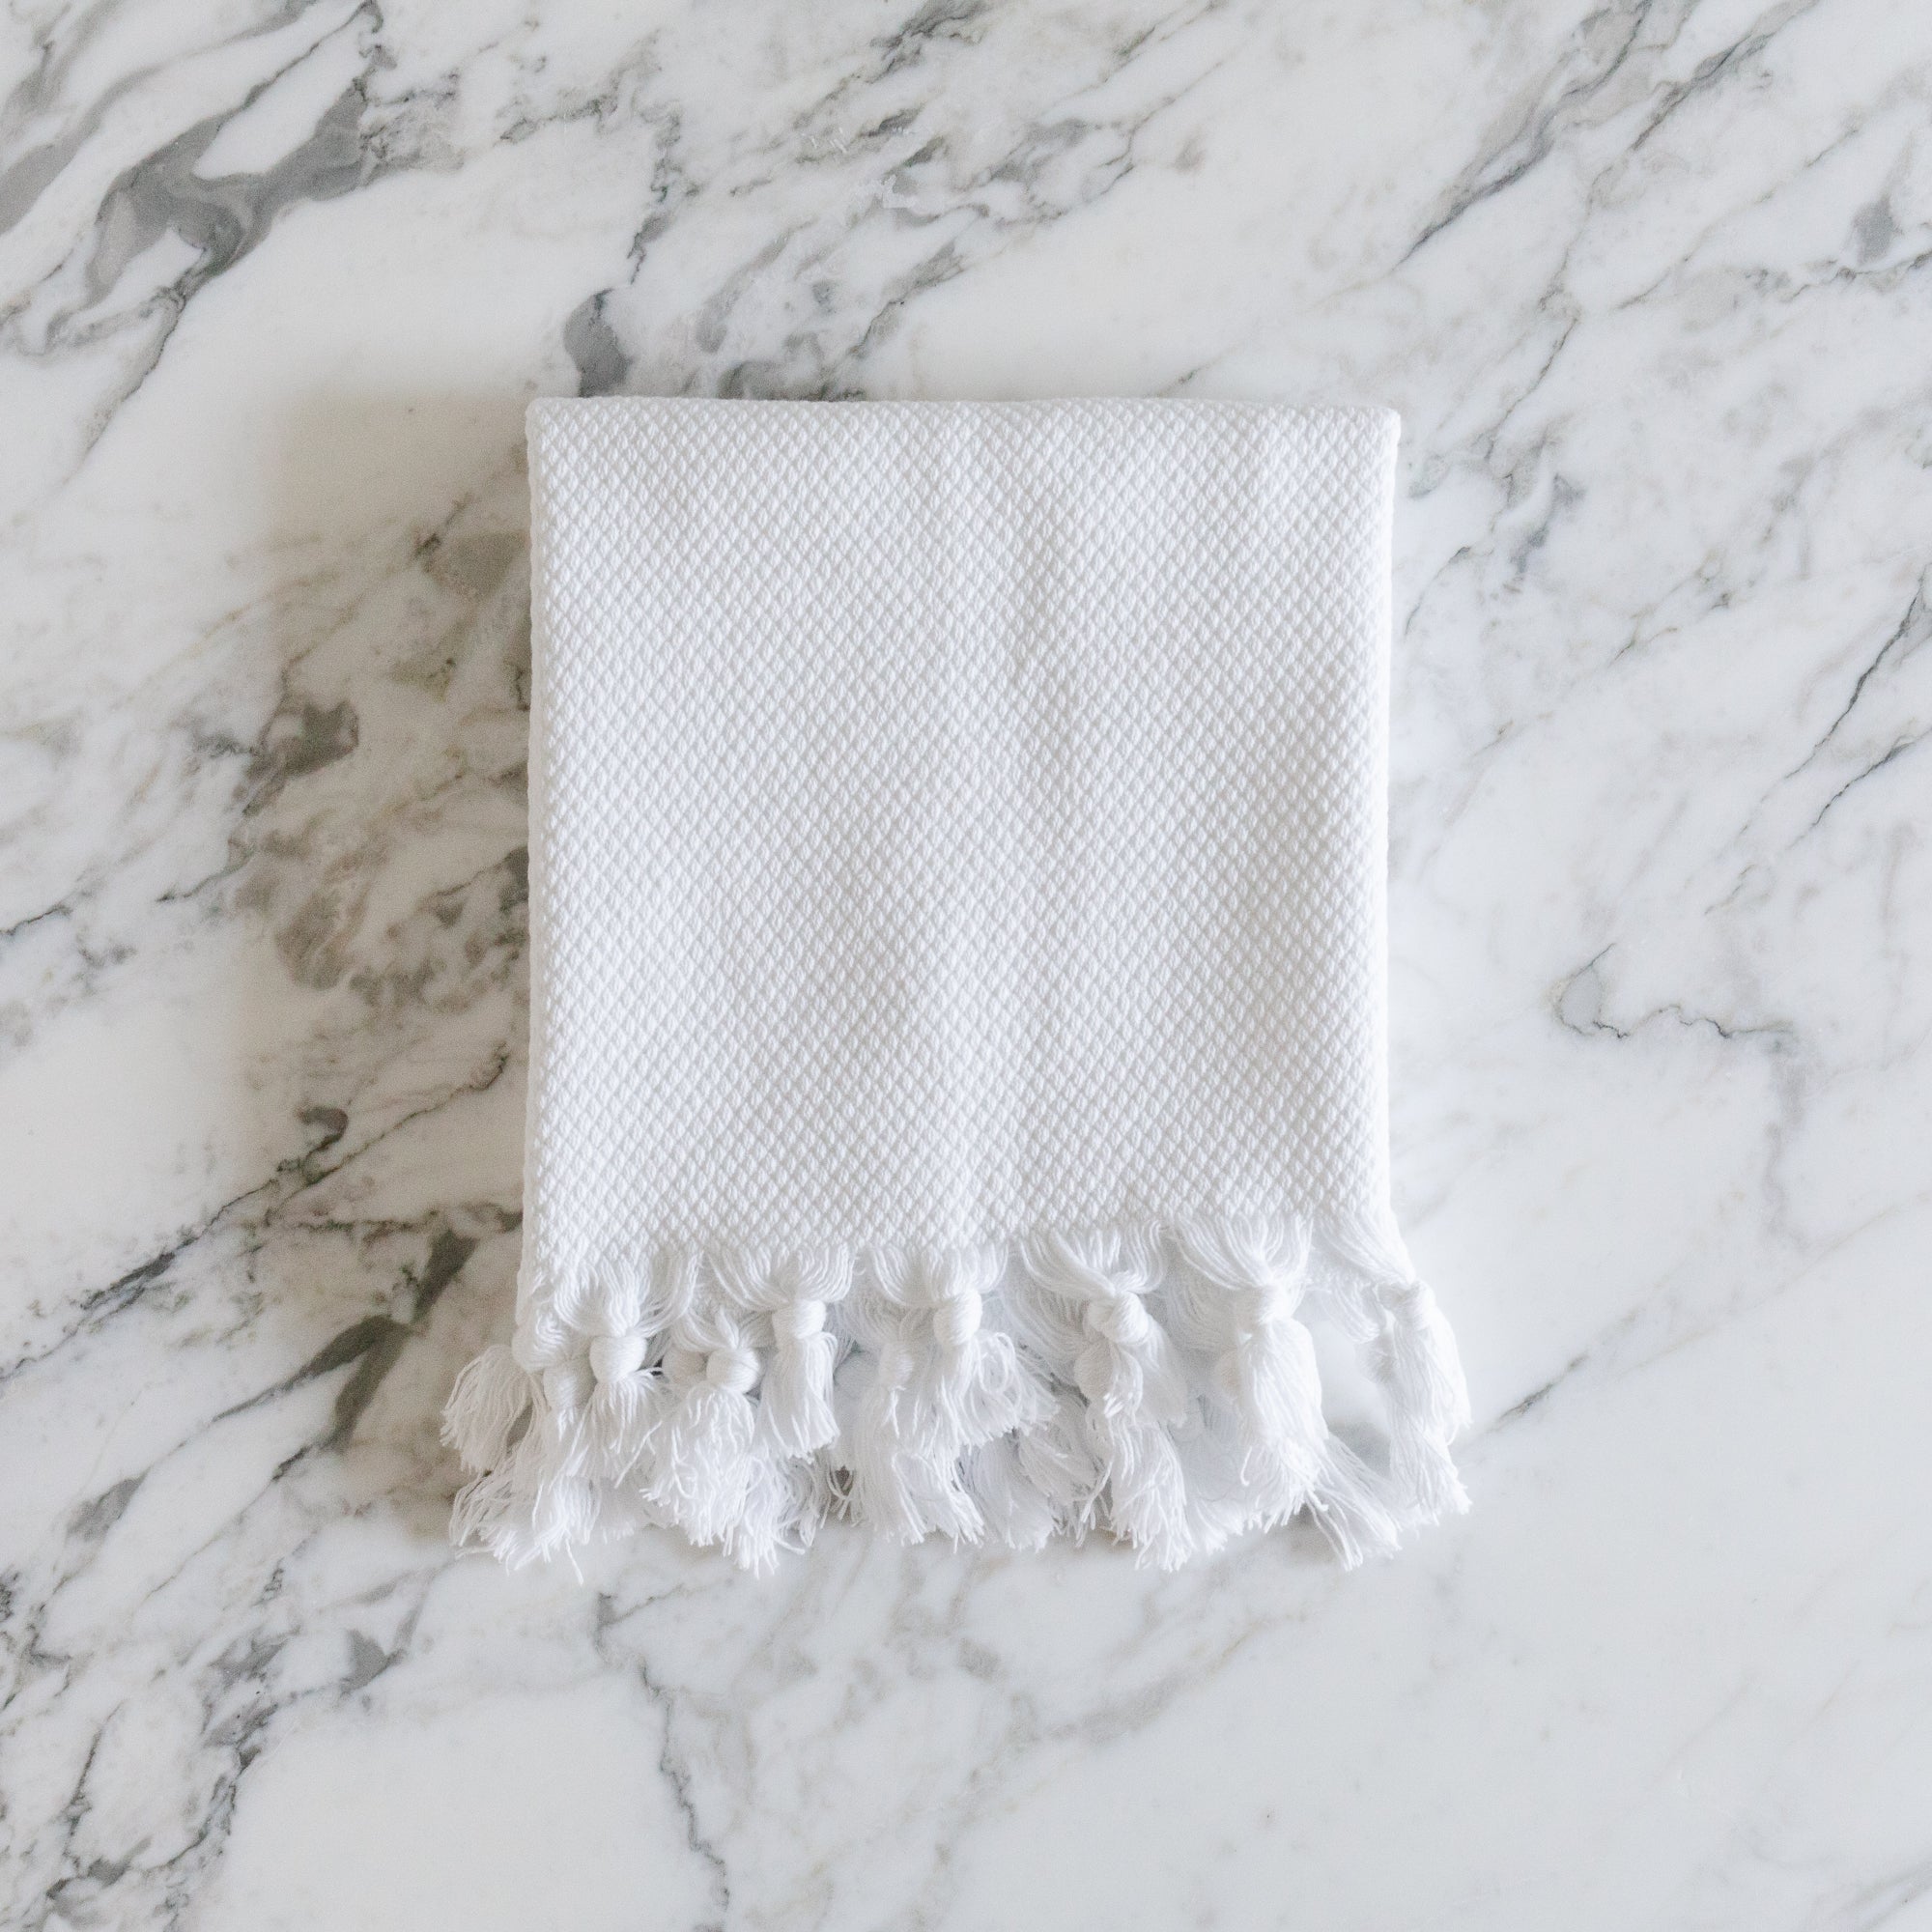 These Turkish Cotton Bath Towels Are 40% Off at